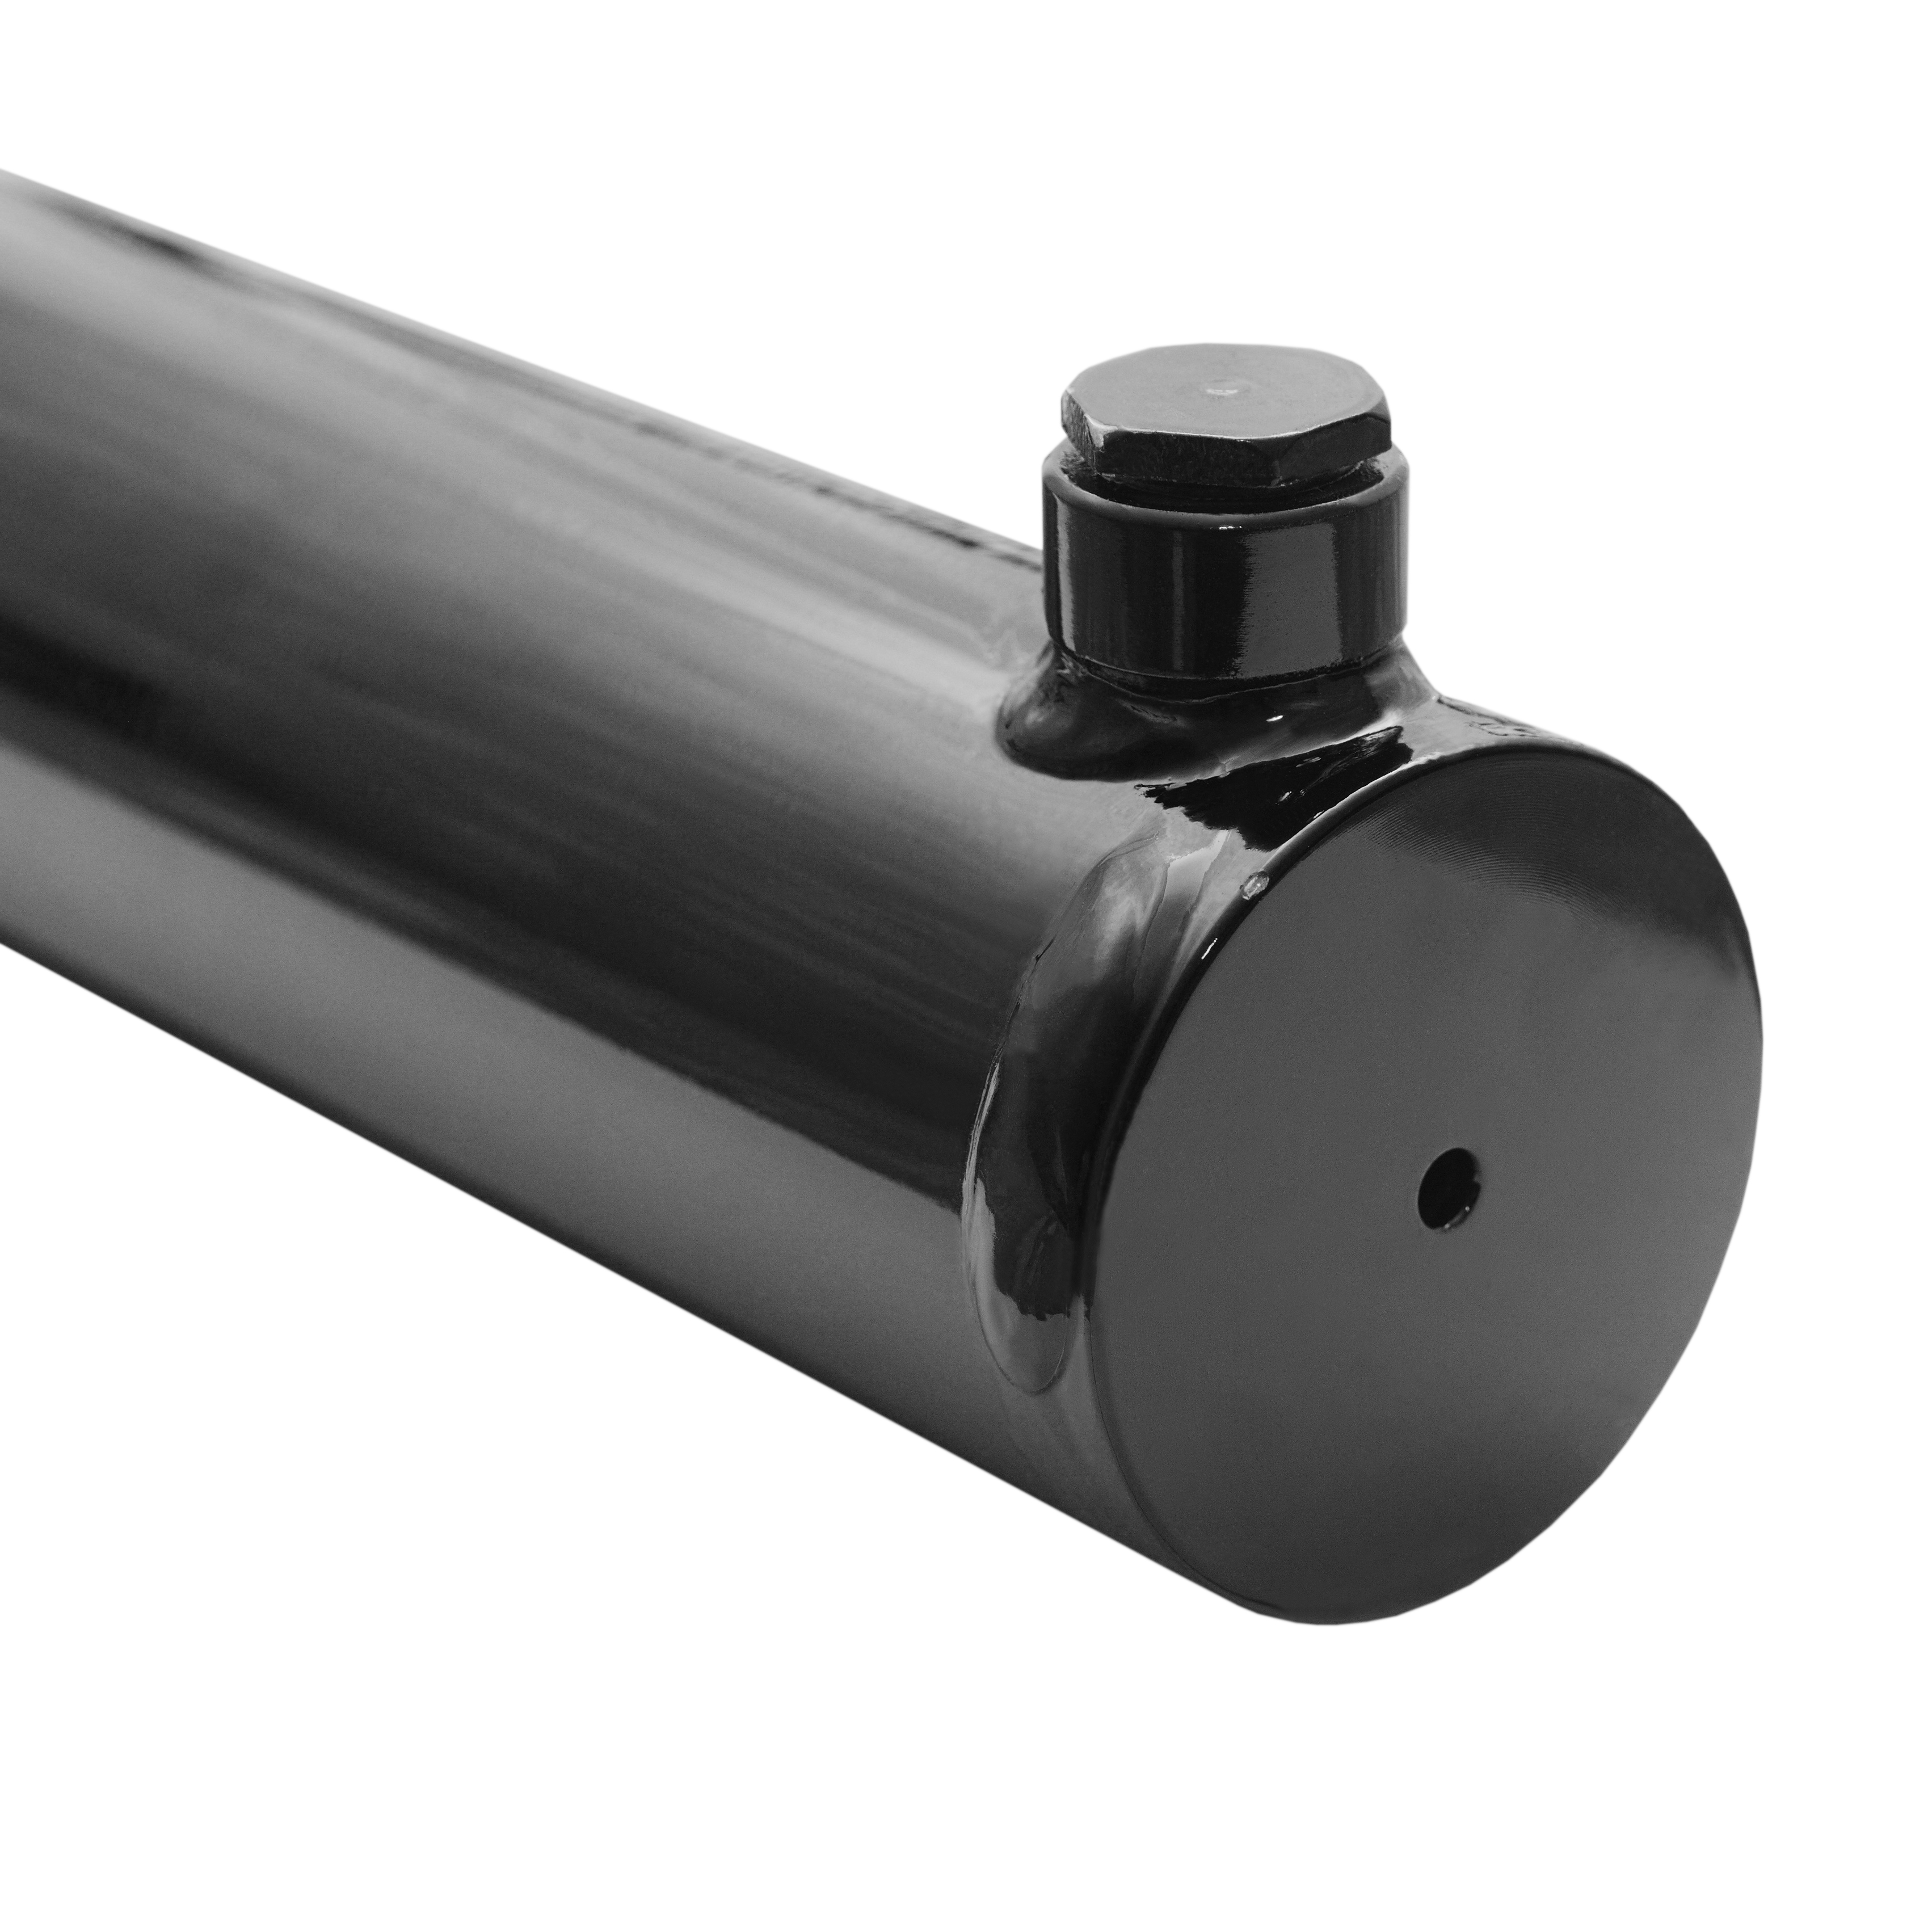 2 bore x 24 stroke hydraulic cylinder, welded universal double acting cylinder | Magister Hydraulics